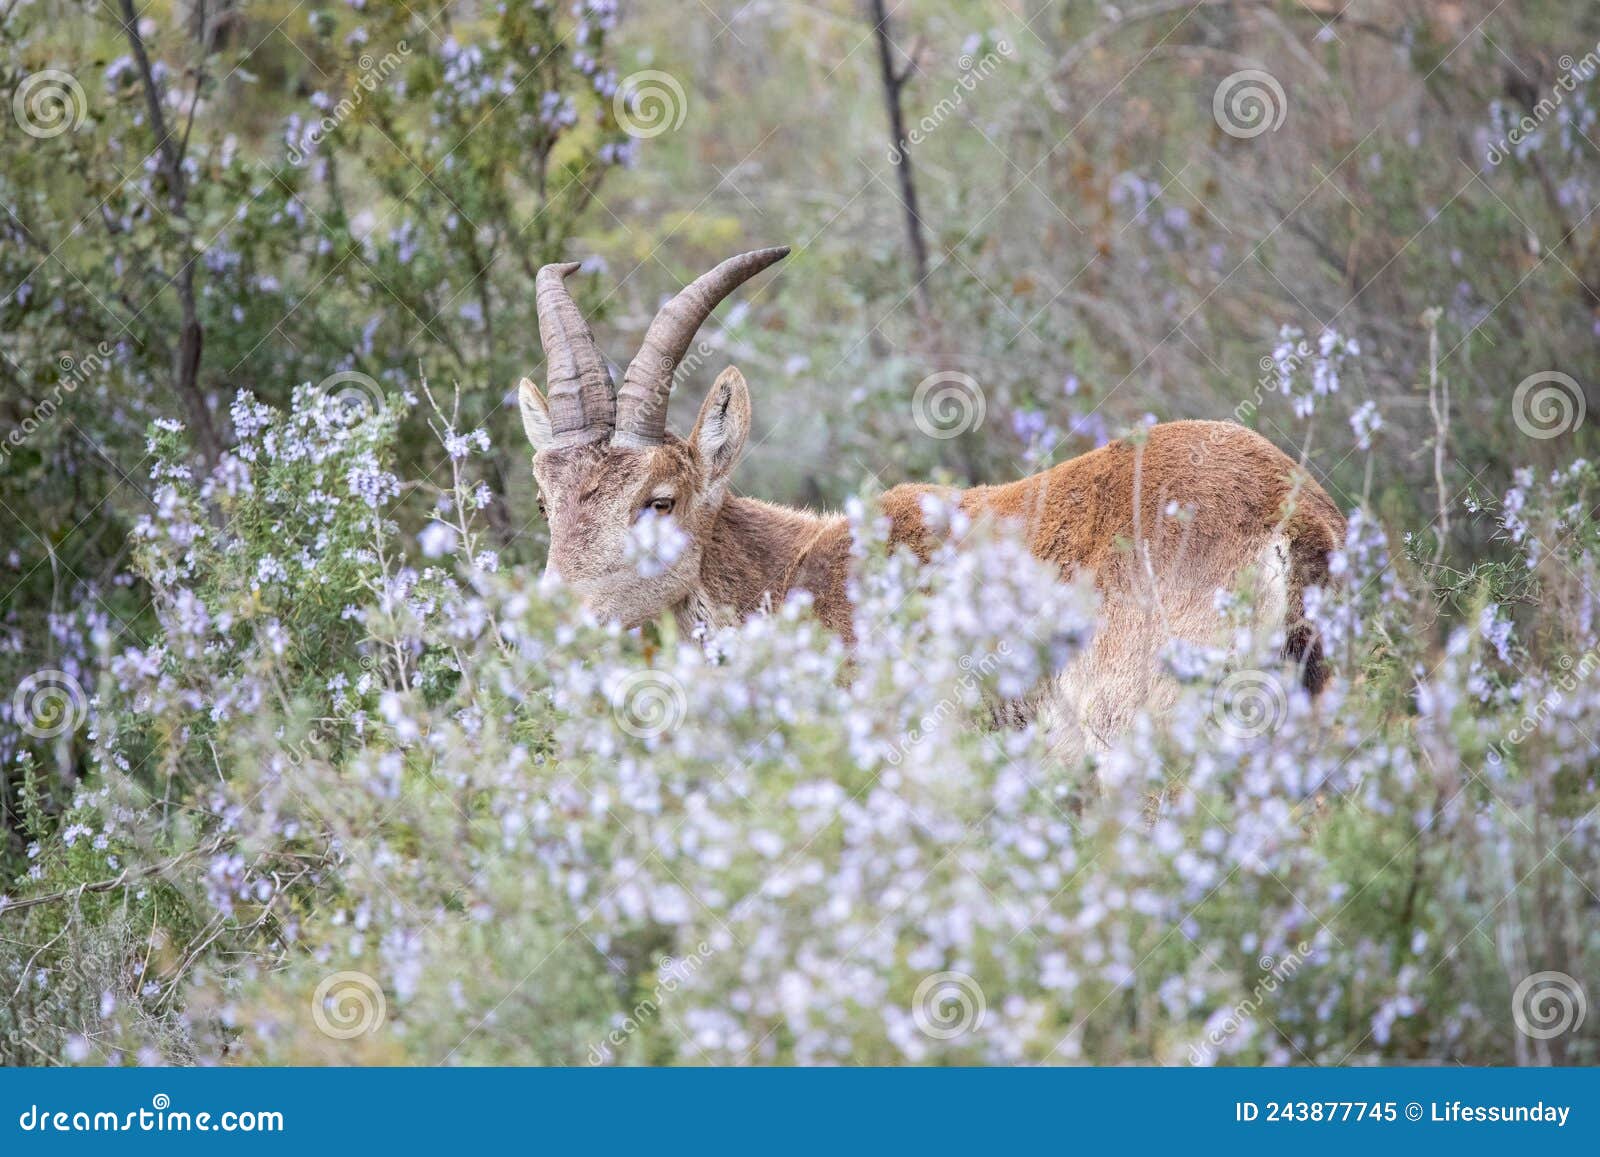 specimen of ibex walking and eating through the mountain vegetation, this type of ibex is common in the european continent and